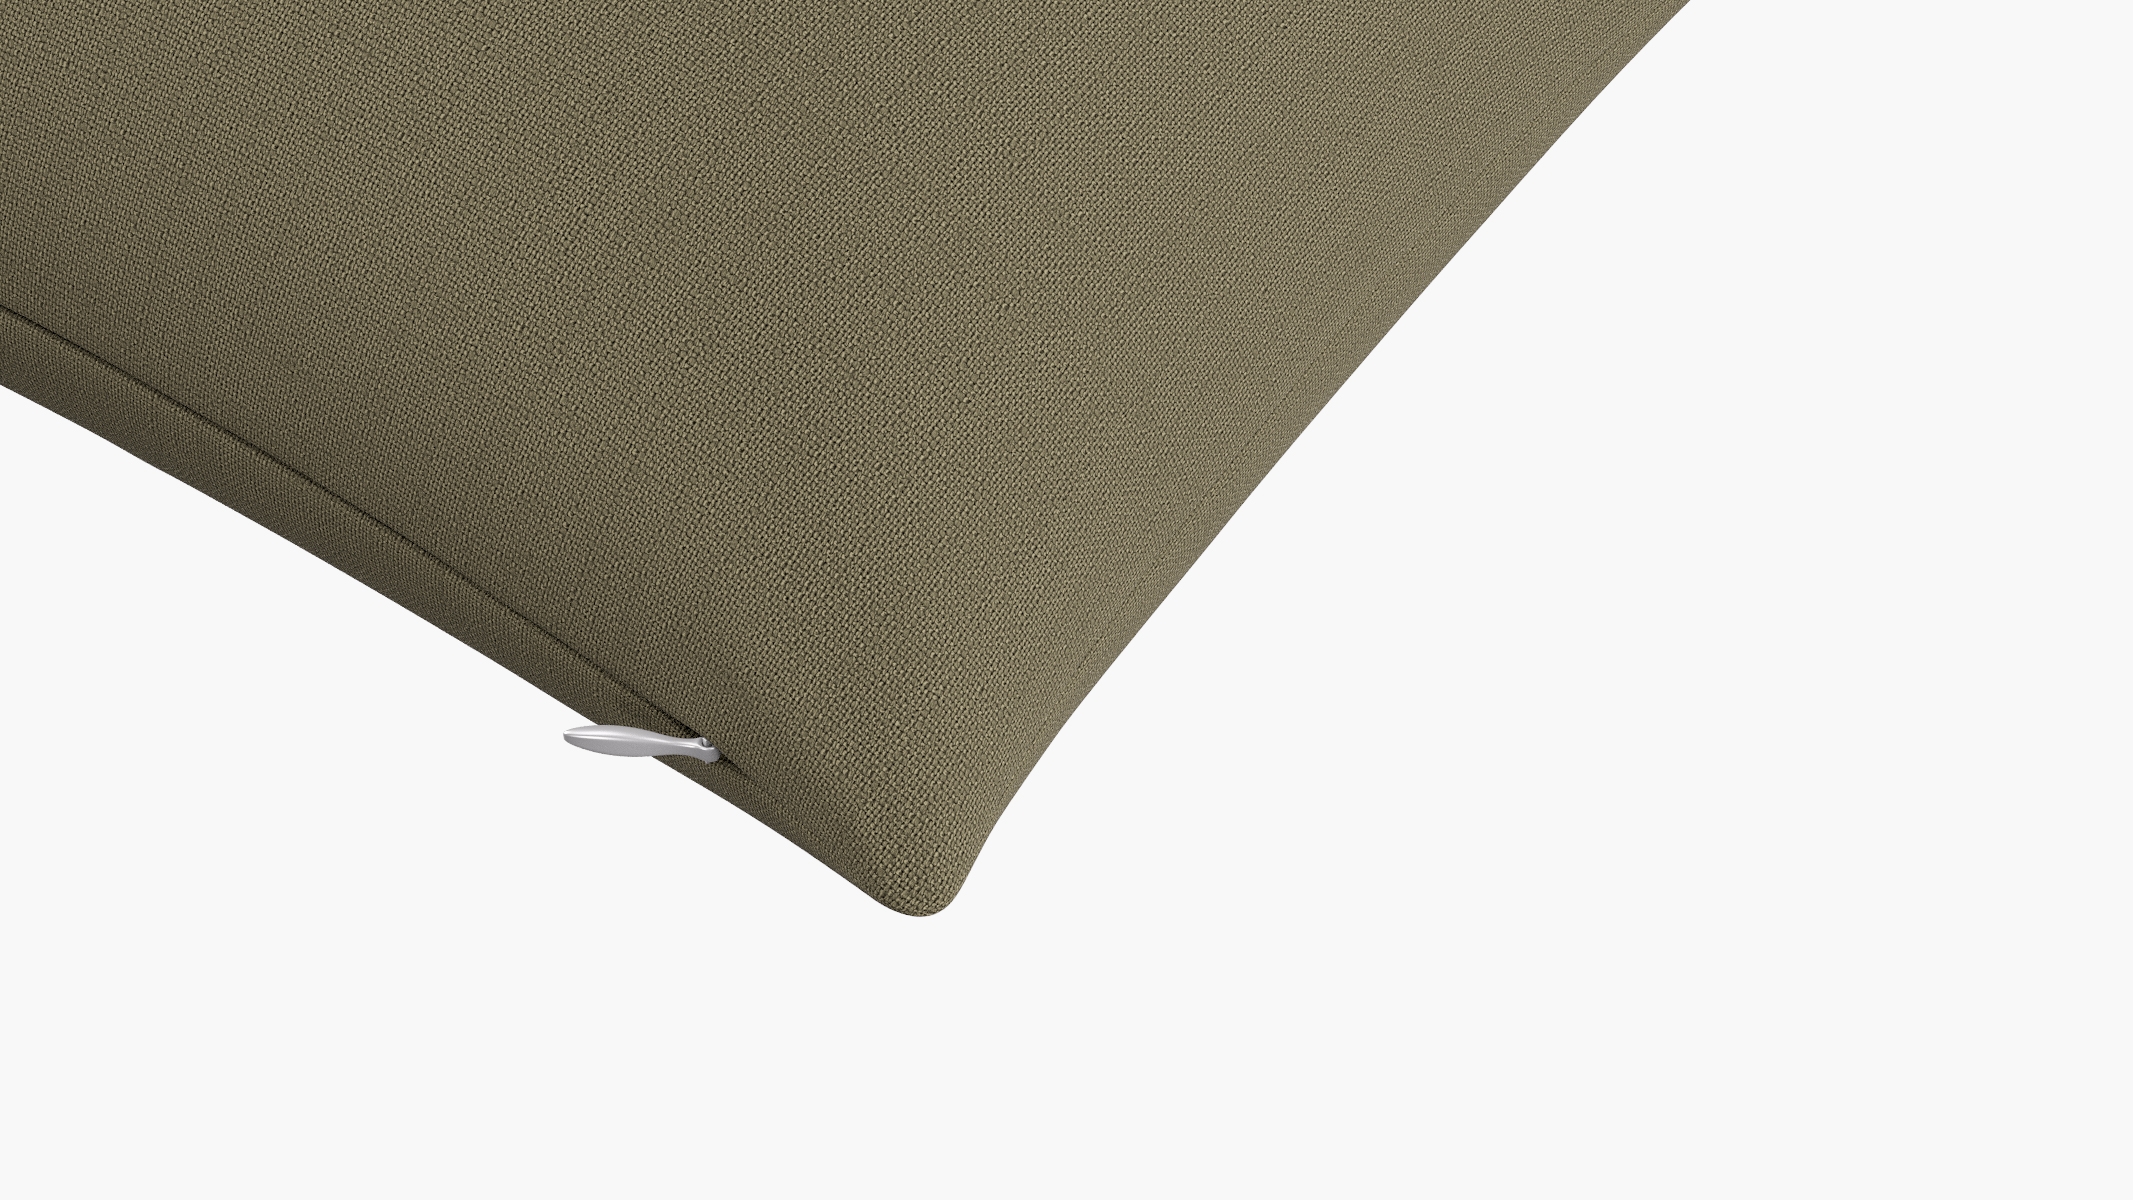 Olive Linen Throw Pillow - 14" x 20" - Image 1